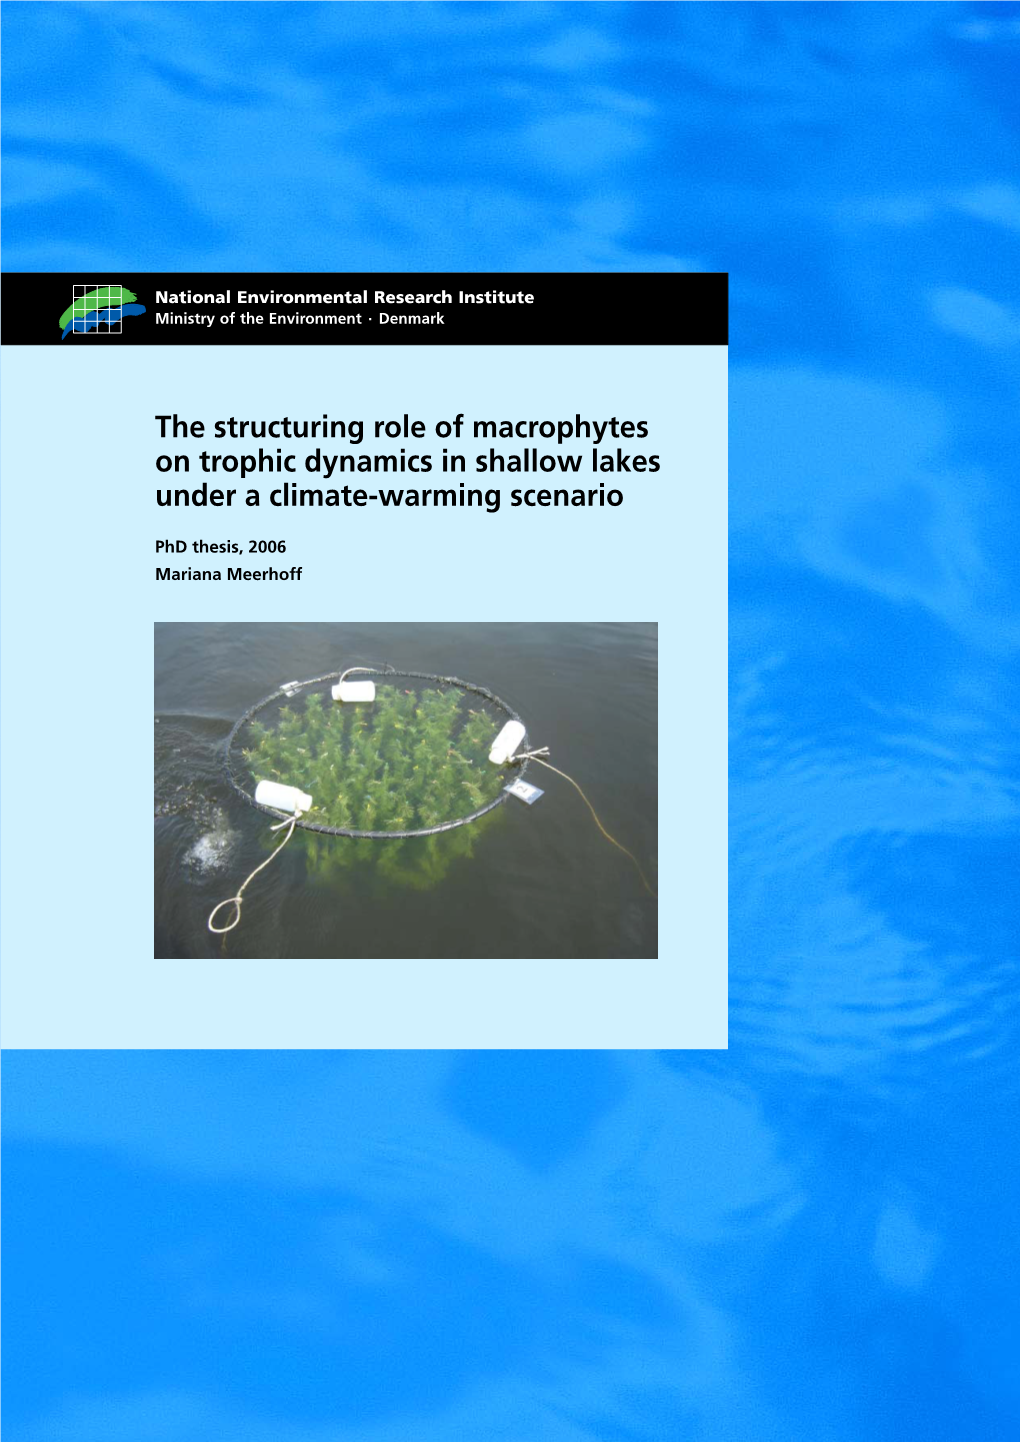 The Structuring Role of Macrophytes on Trophic Dynamics in Shallow Lakes Under a Climate-Warming Scenario